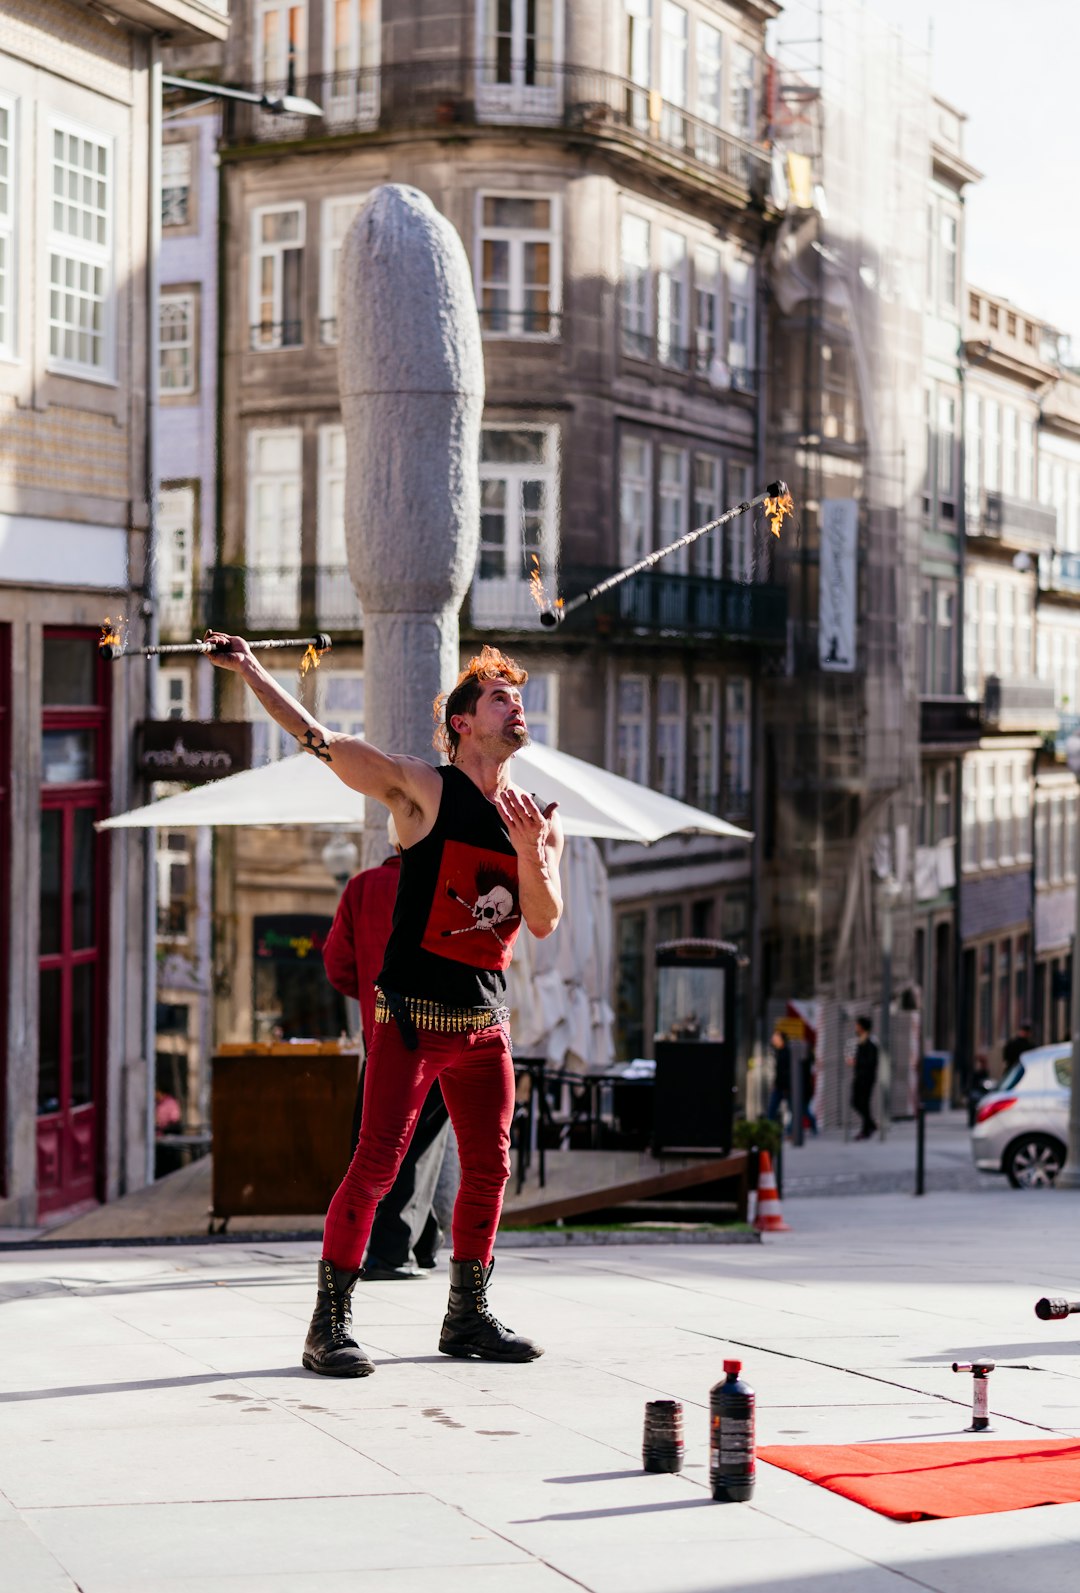 street performer wearing black and red muscle shirt standing on pavement